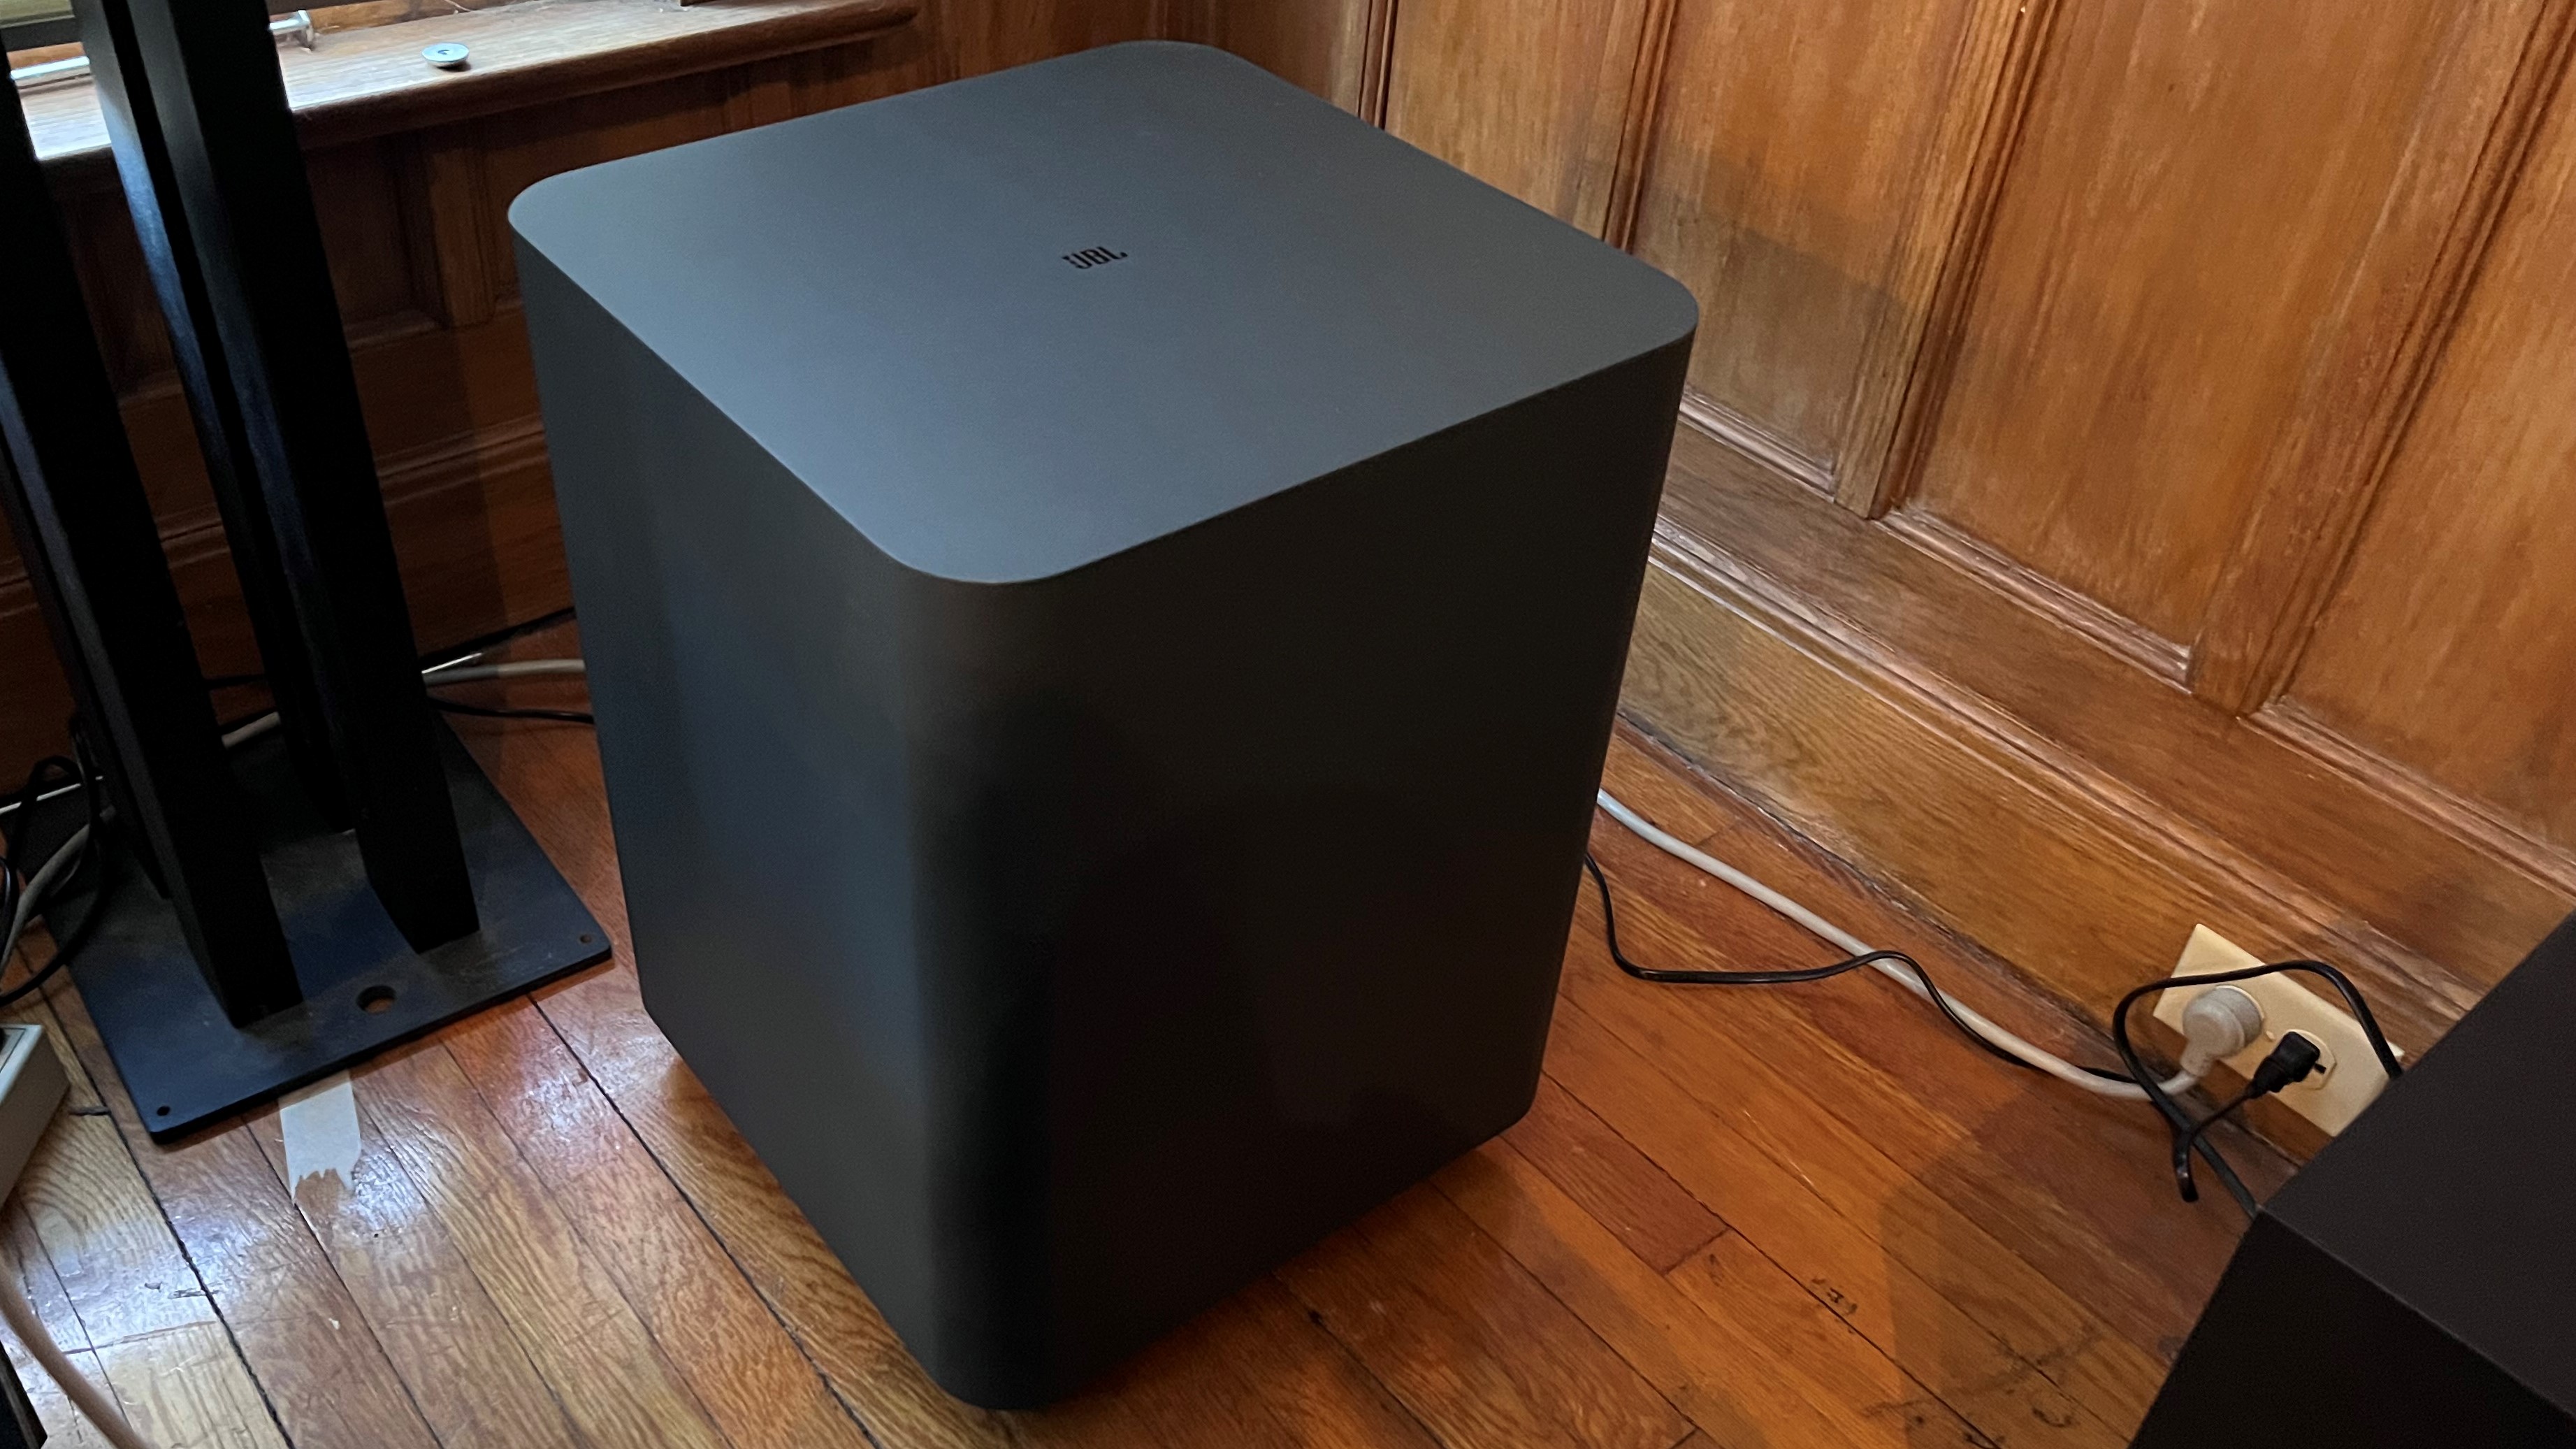 JBL Bar 1300X subwoofer in room with wood paneling